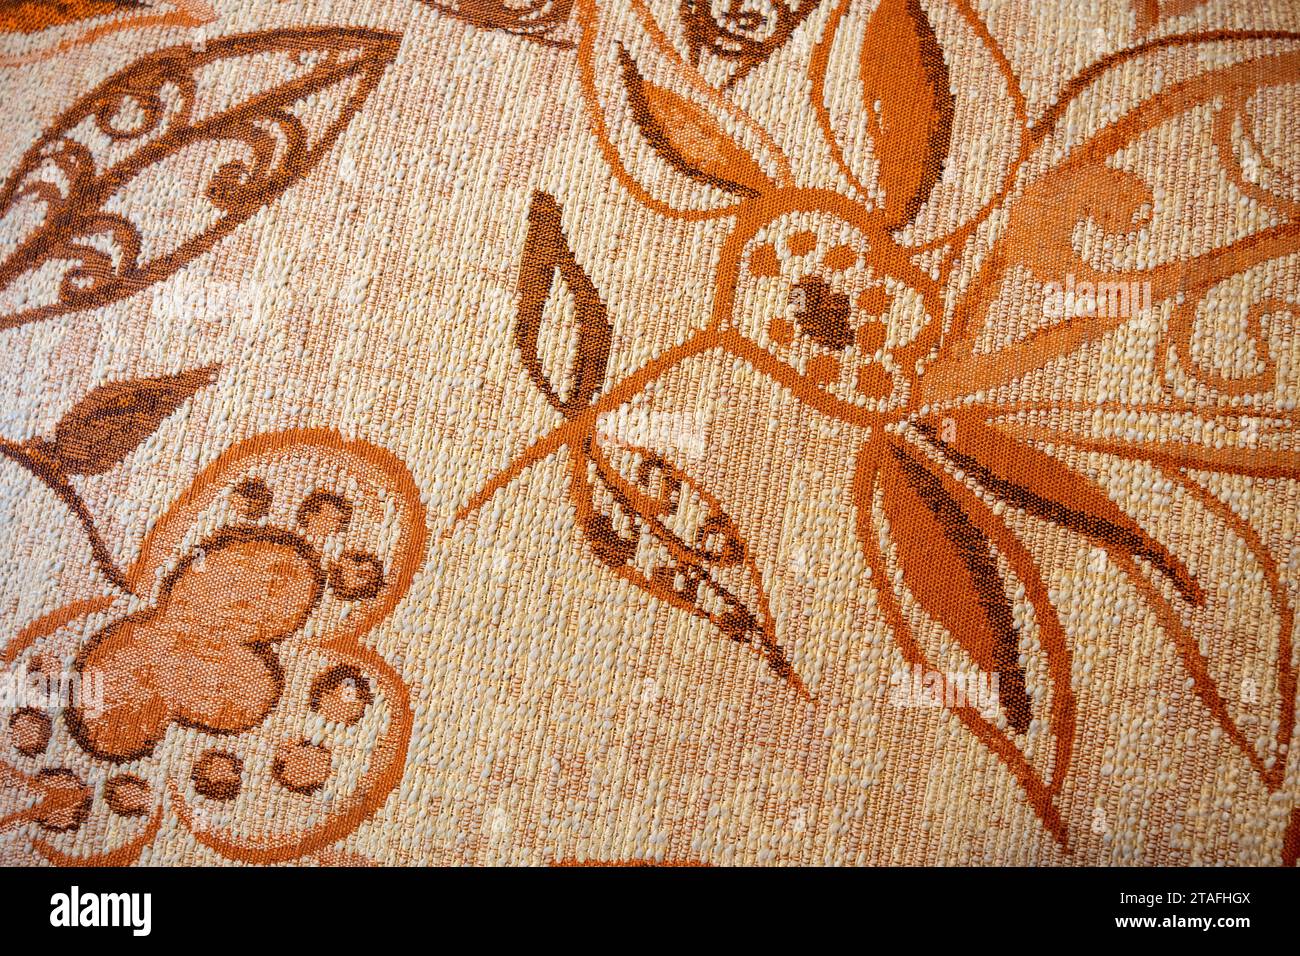 photo of fabric texture with design Stock Photo